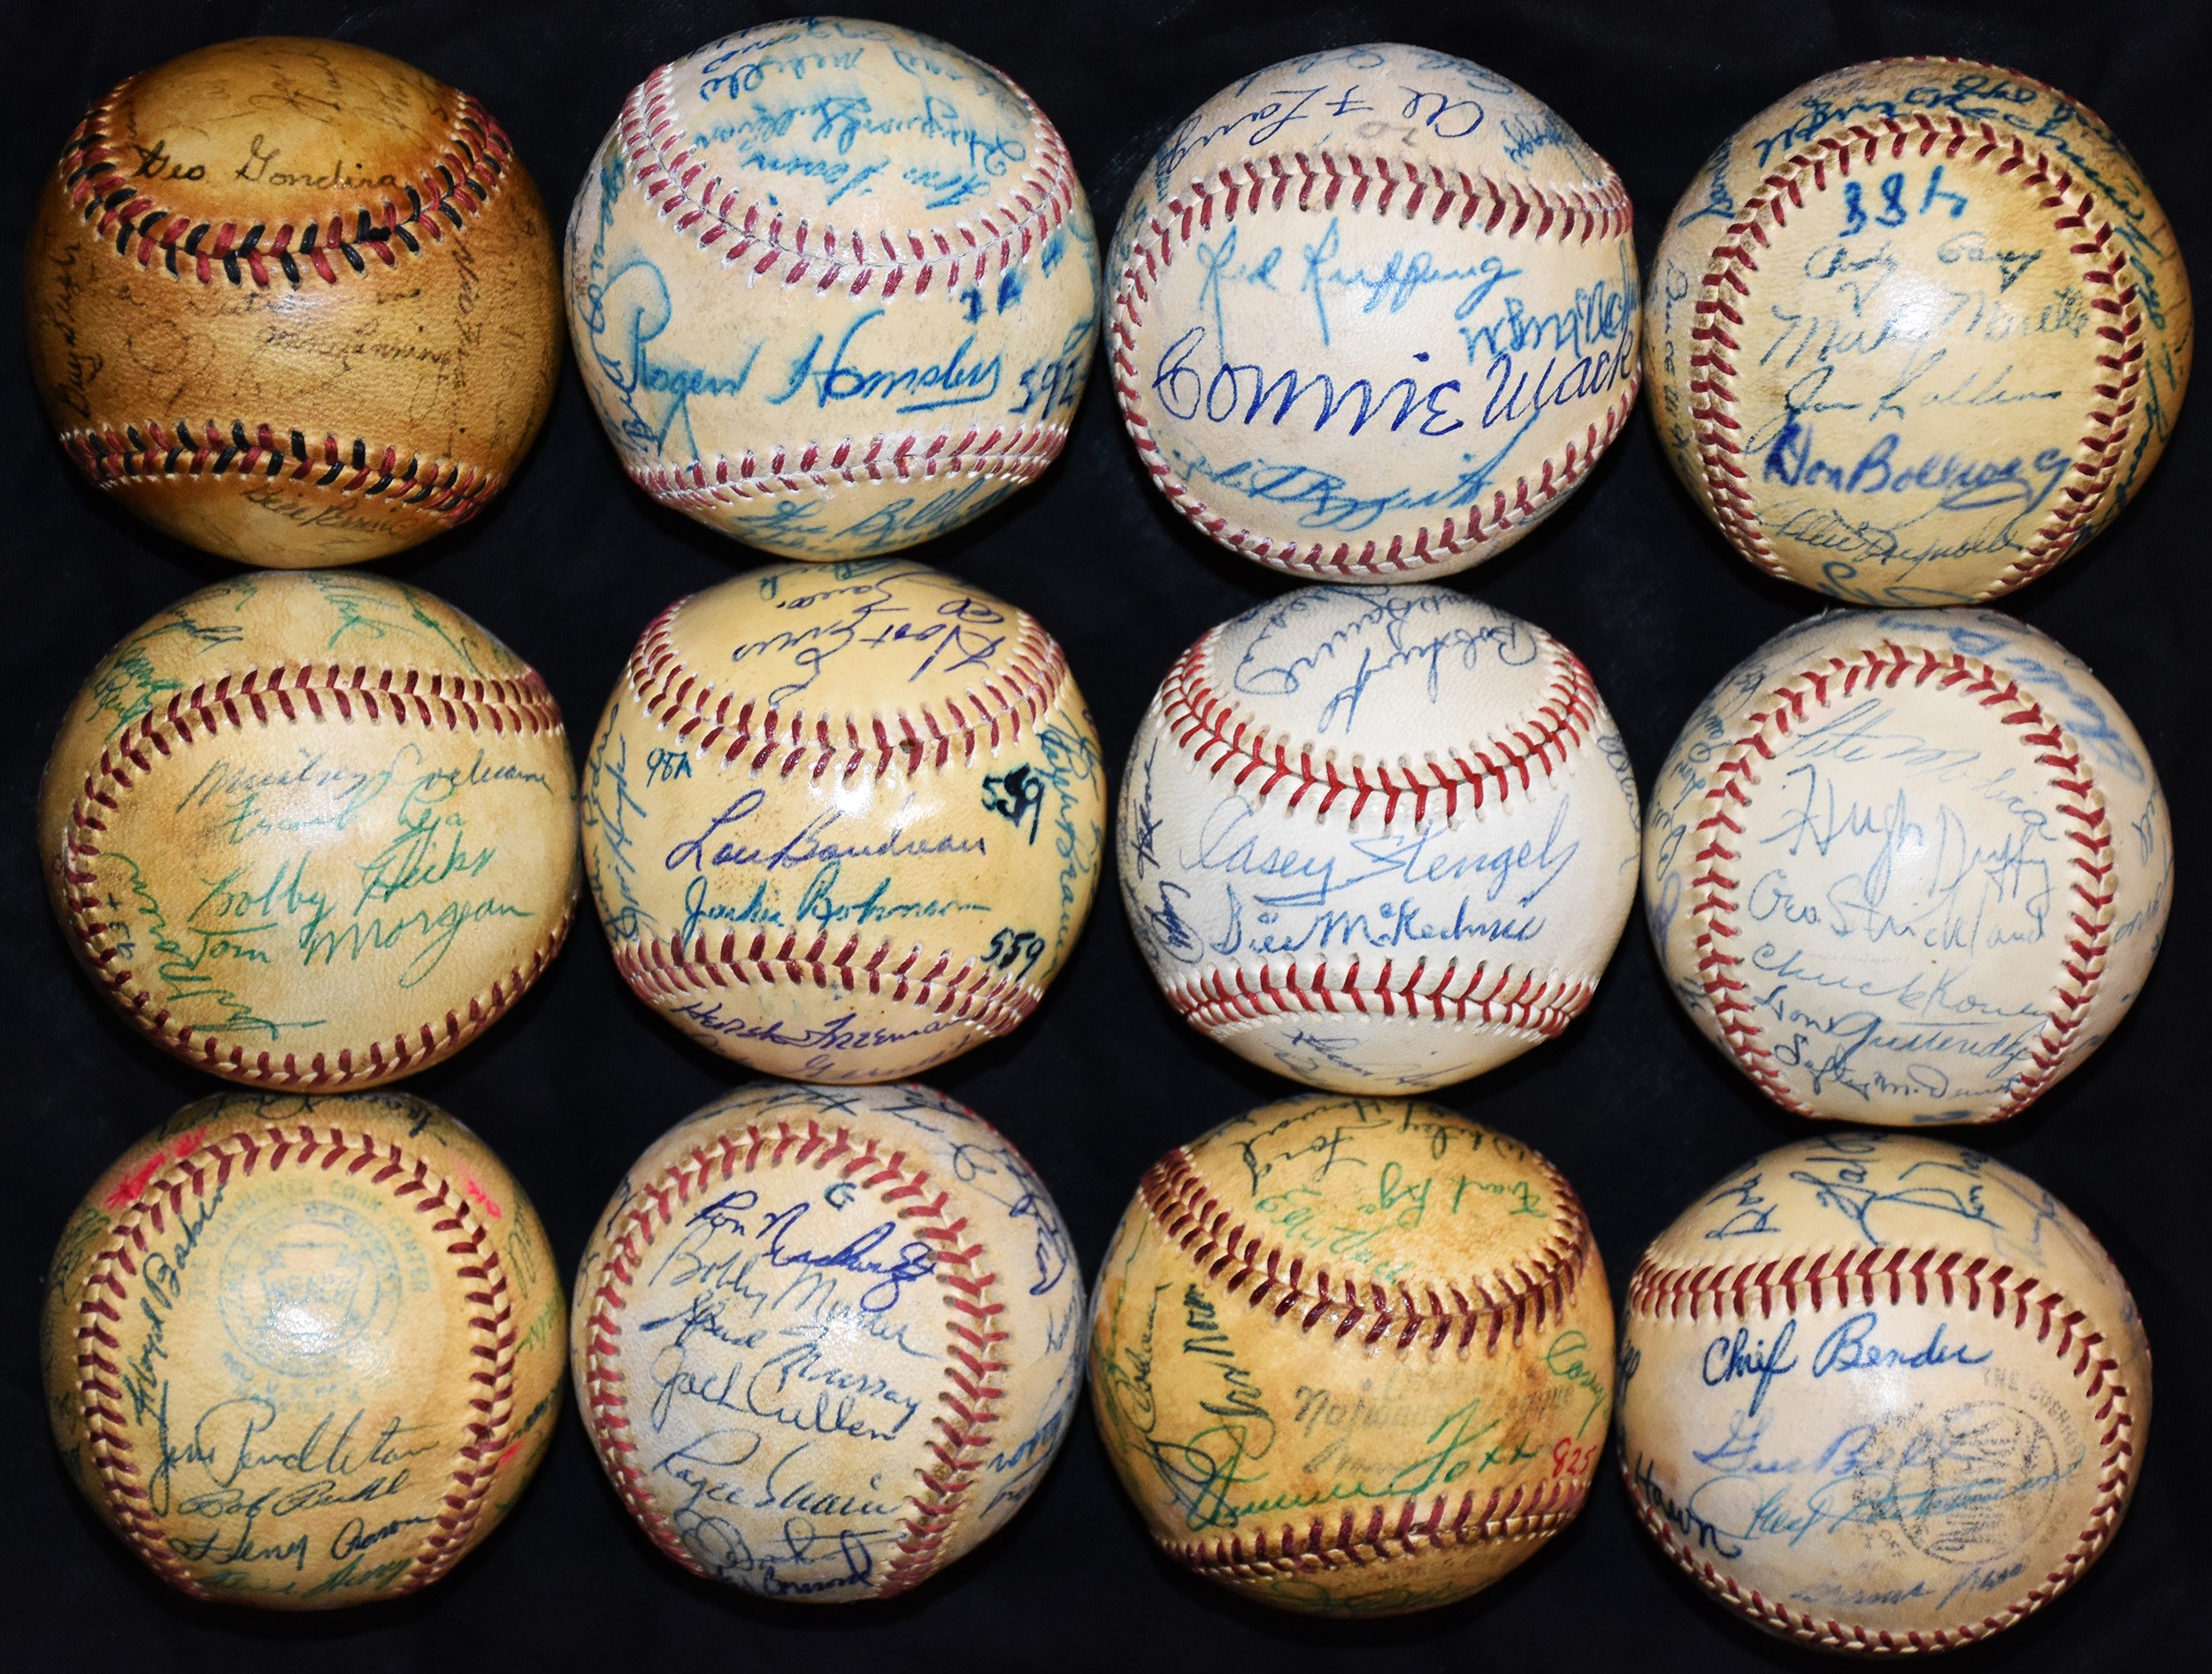 Incredible 1930s-60s Hall of Fame & Team-Signed Baseball Collection w/Gehrig, Foxx, Hornsby & Robinson (45+)